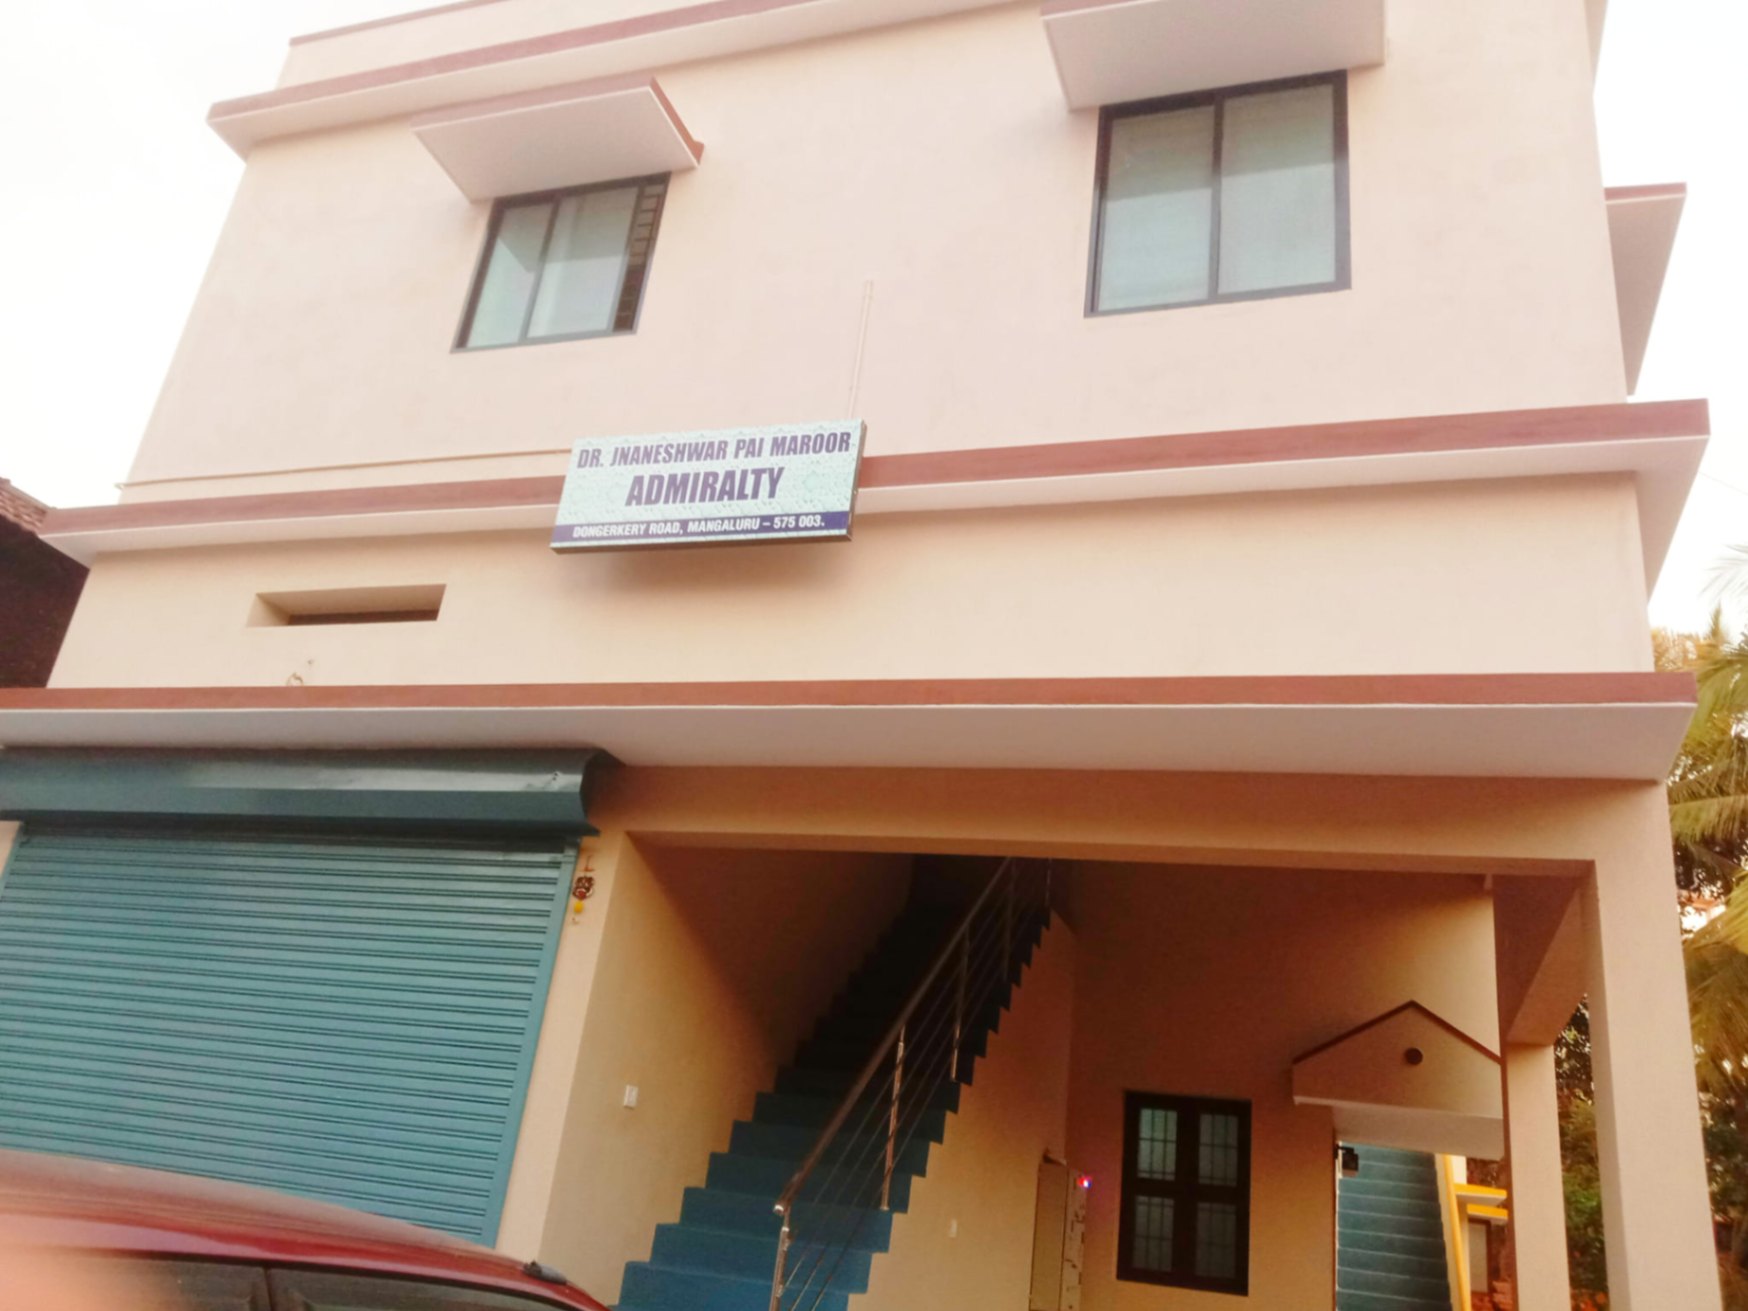 1 Bed/ 1 Bath Rent Apartment/ Flat; 450 sq. ft. carpet area, UnFurnished for rent @DONGERKERY ROAD MANGALORE